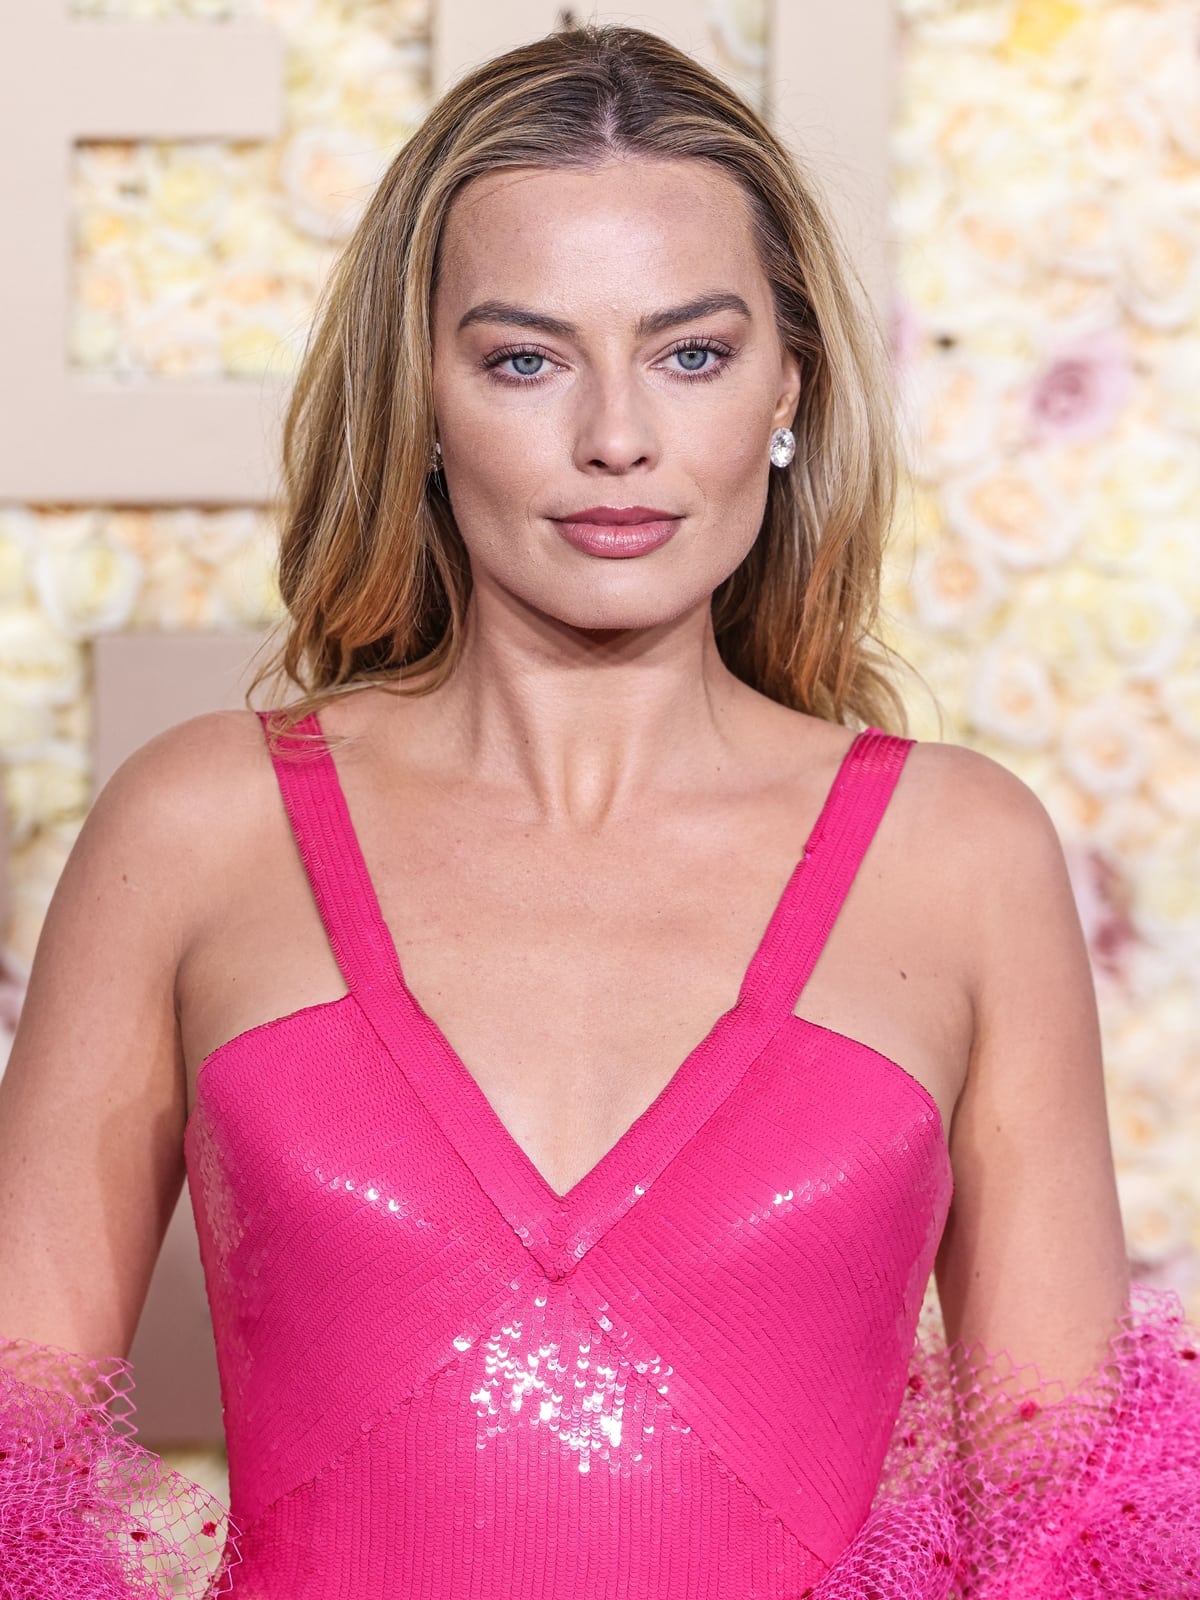 Margot Robbie dazzles with $3 million worth of Lorraine Schwartz Jewelry, featuring 30-carat diamond earrings and a rare Golconda Diamond ring, at the Golden Globe Awards